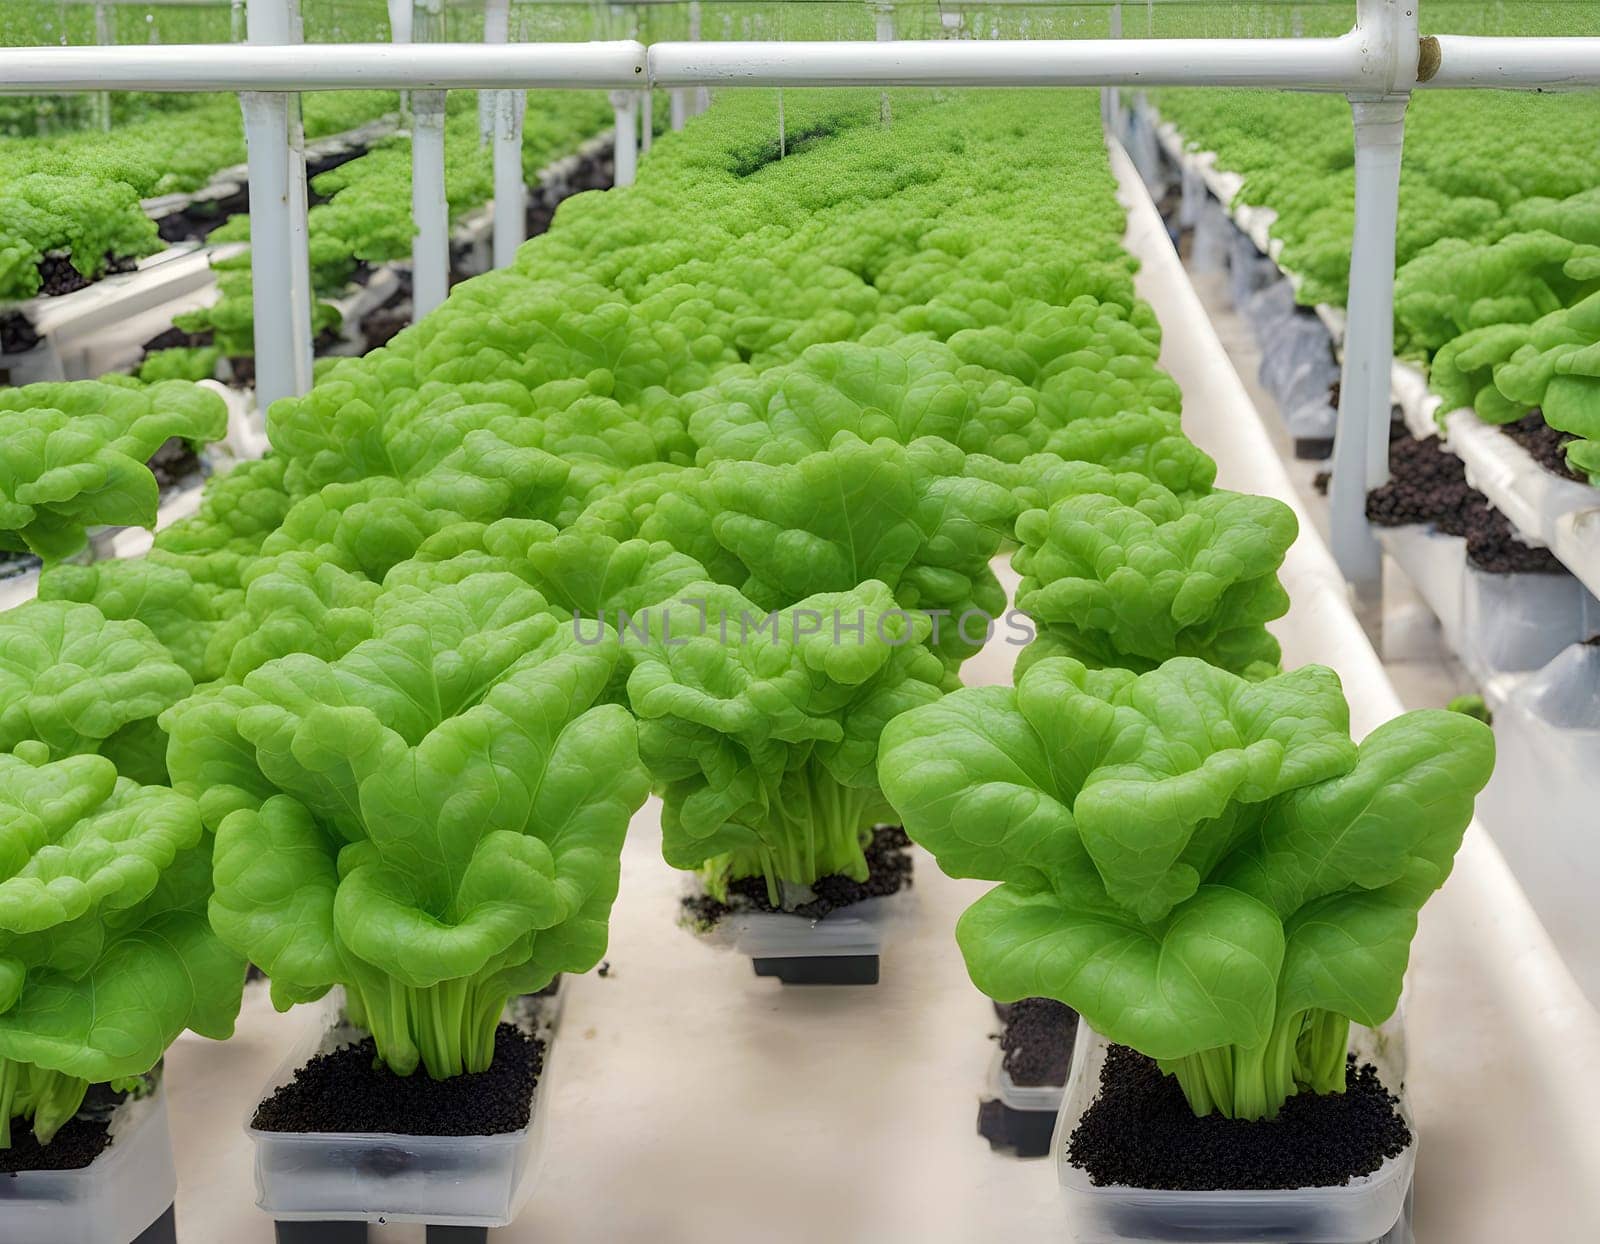 Hydroponic Lettuce Cultivation in a Greenhouse by rostik924